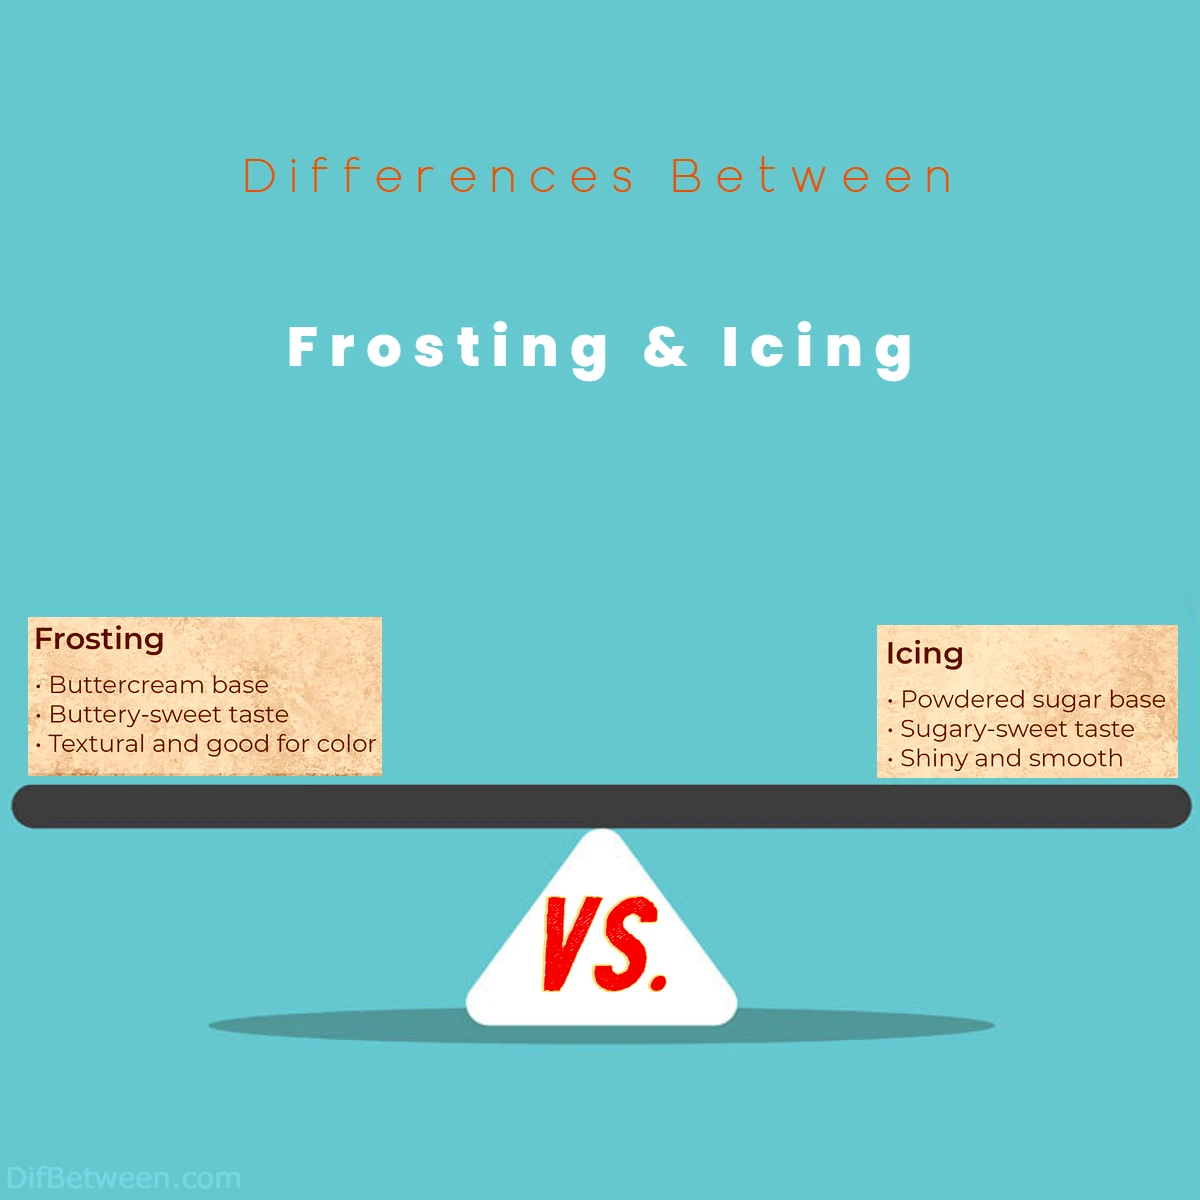 Differences Between Frosting and Icing